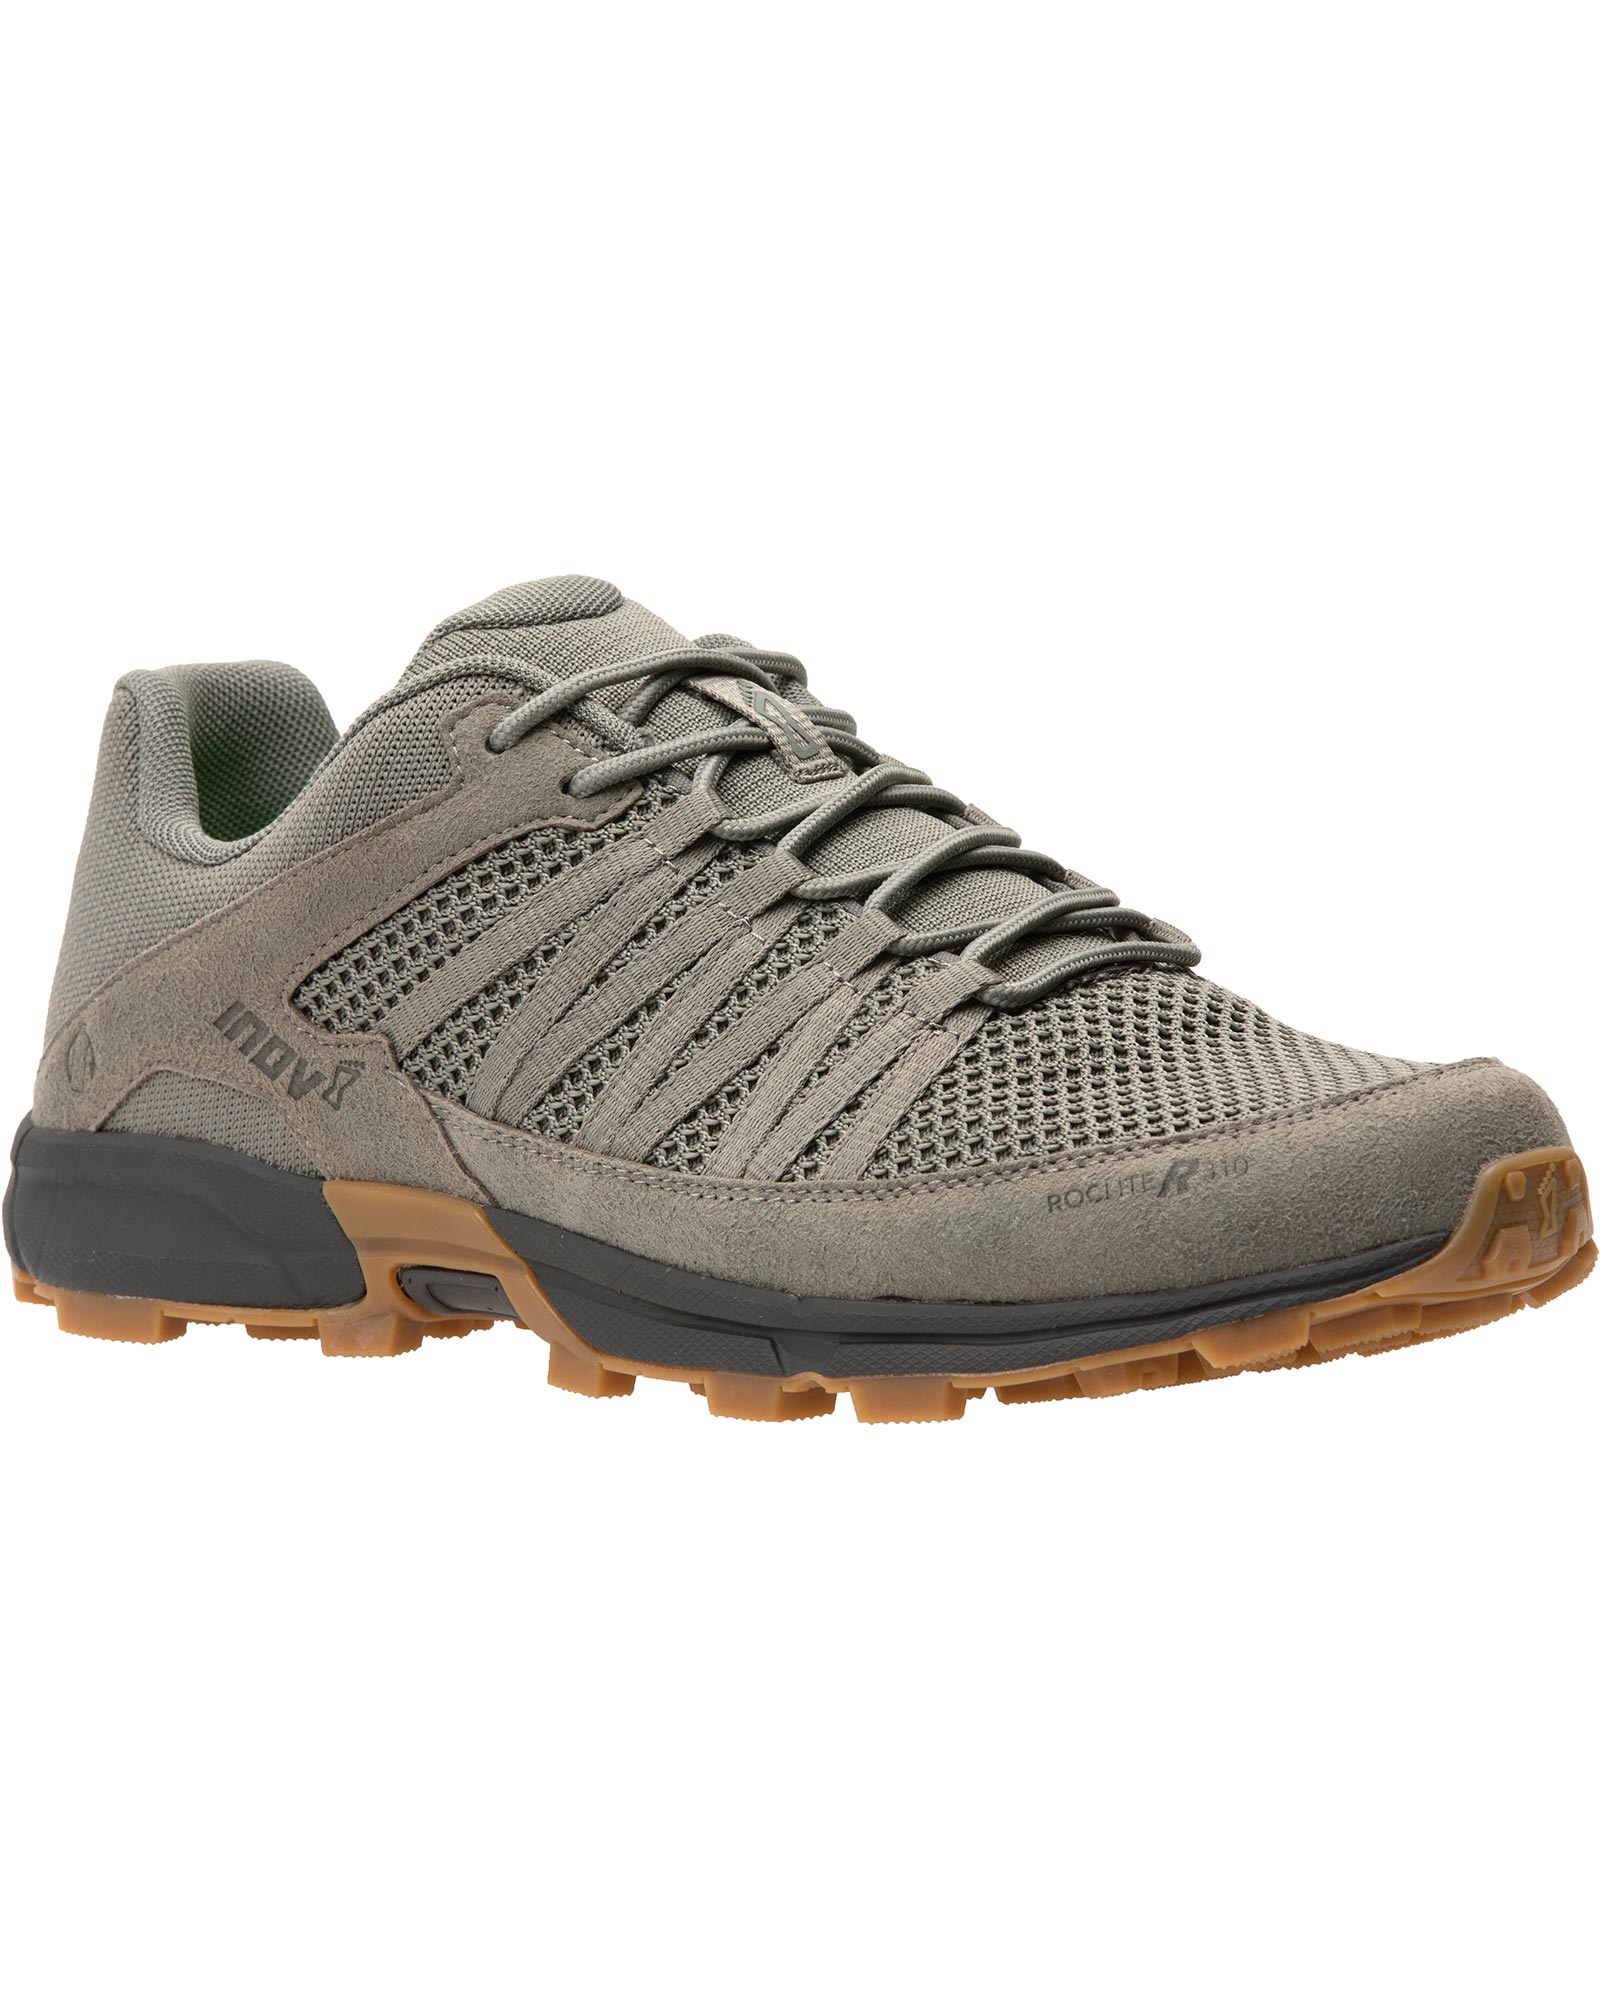 Inov-8 Roclite Recycled 310 Mens Shoes